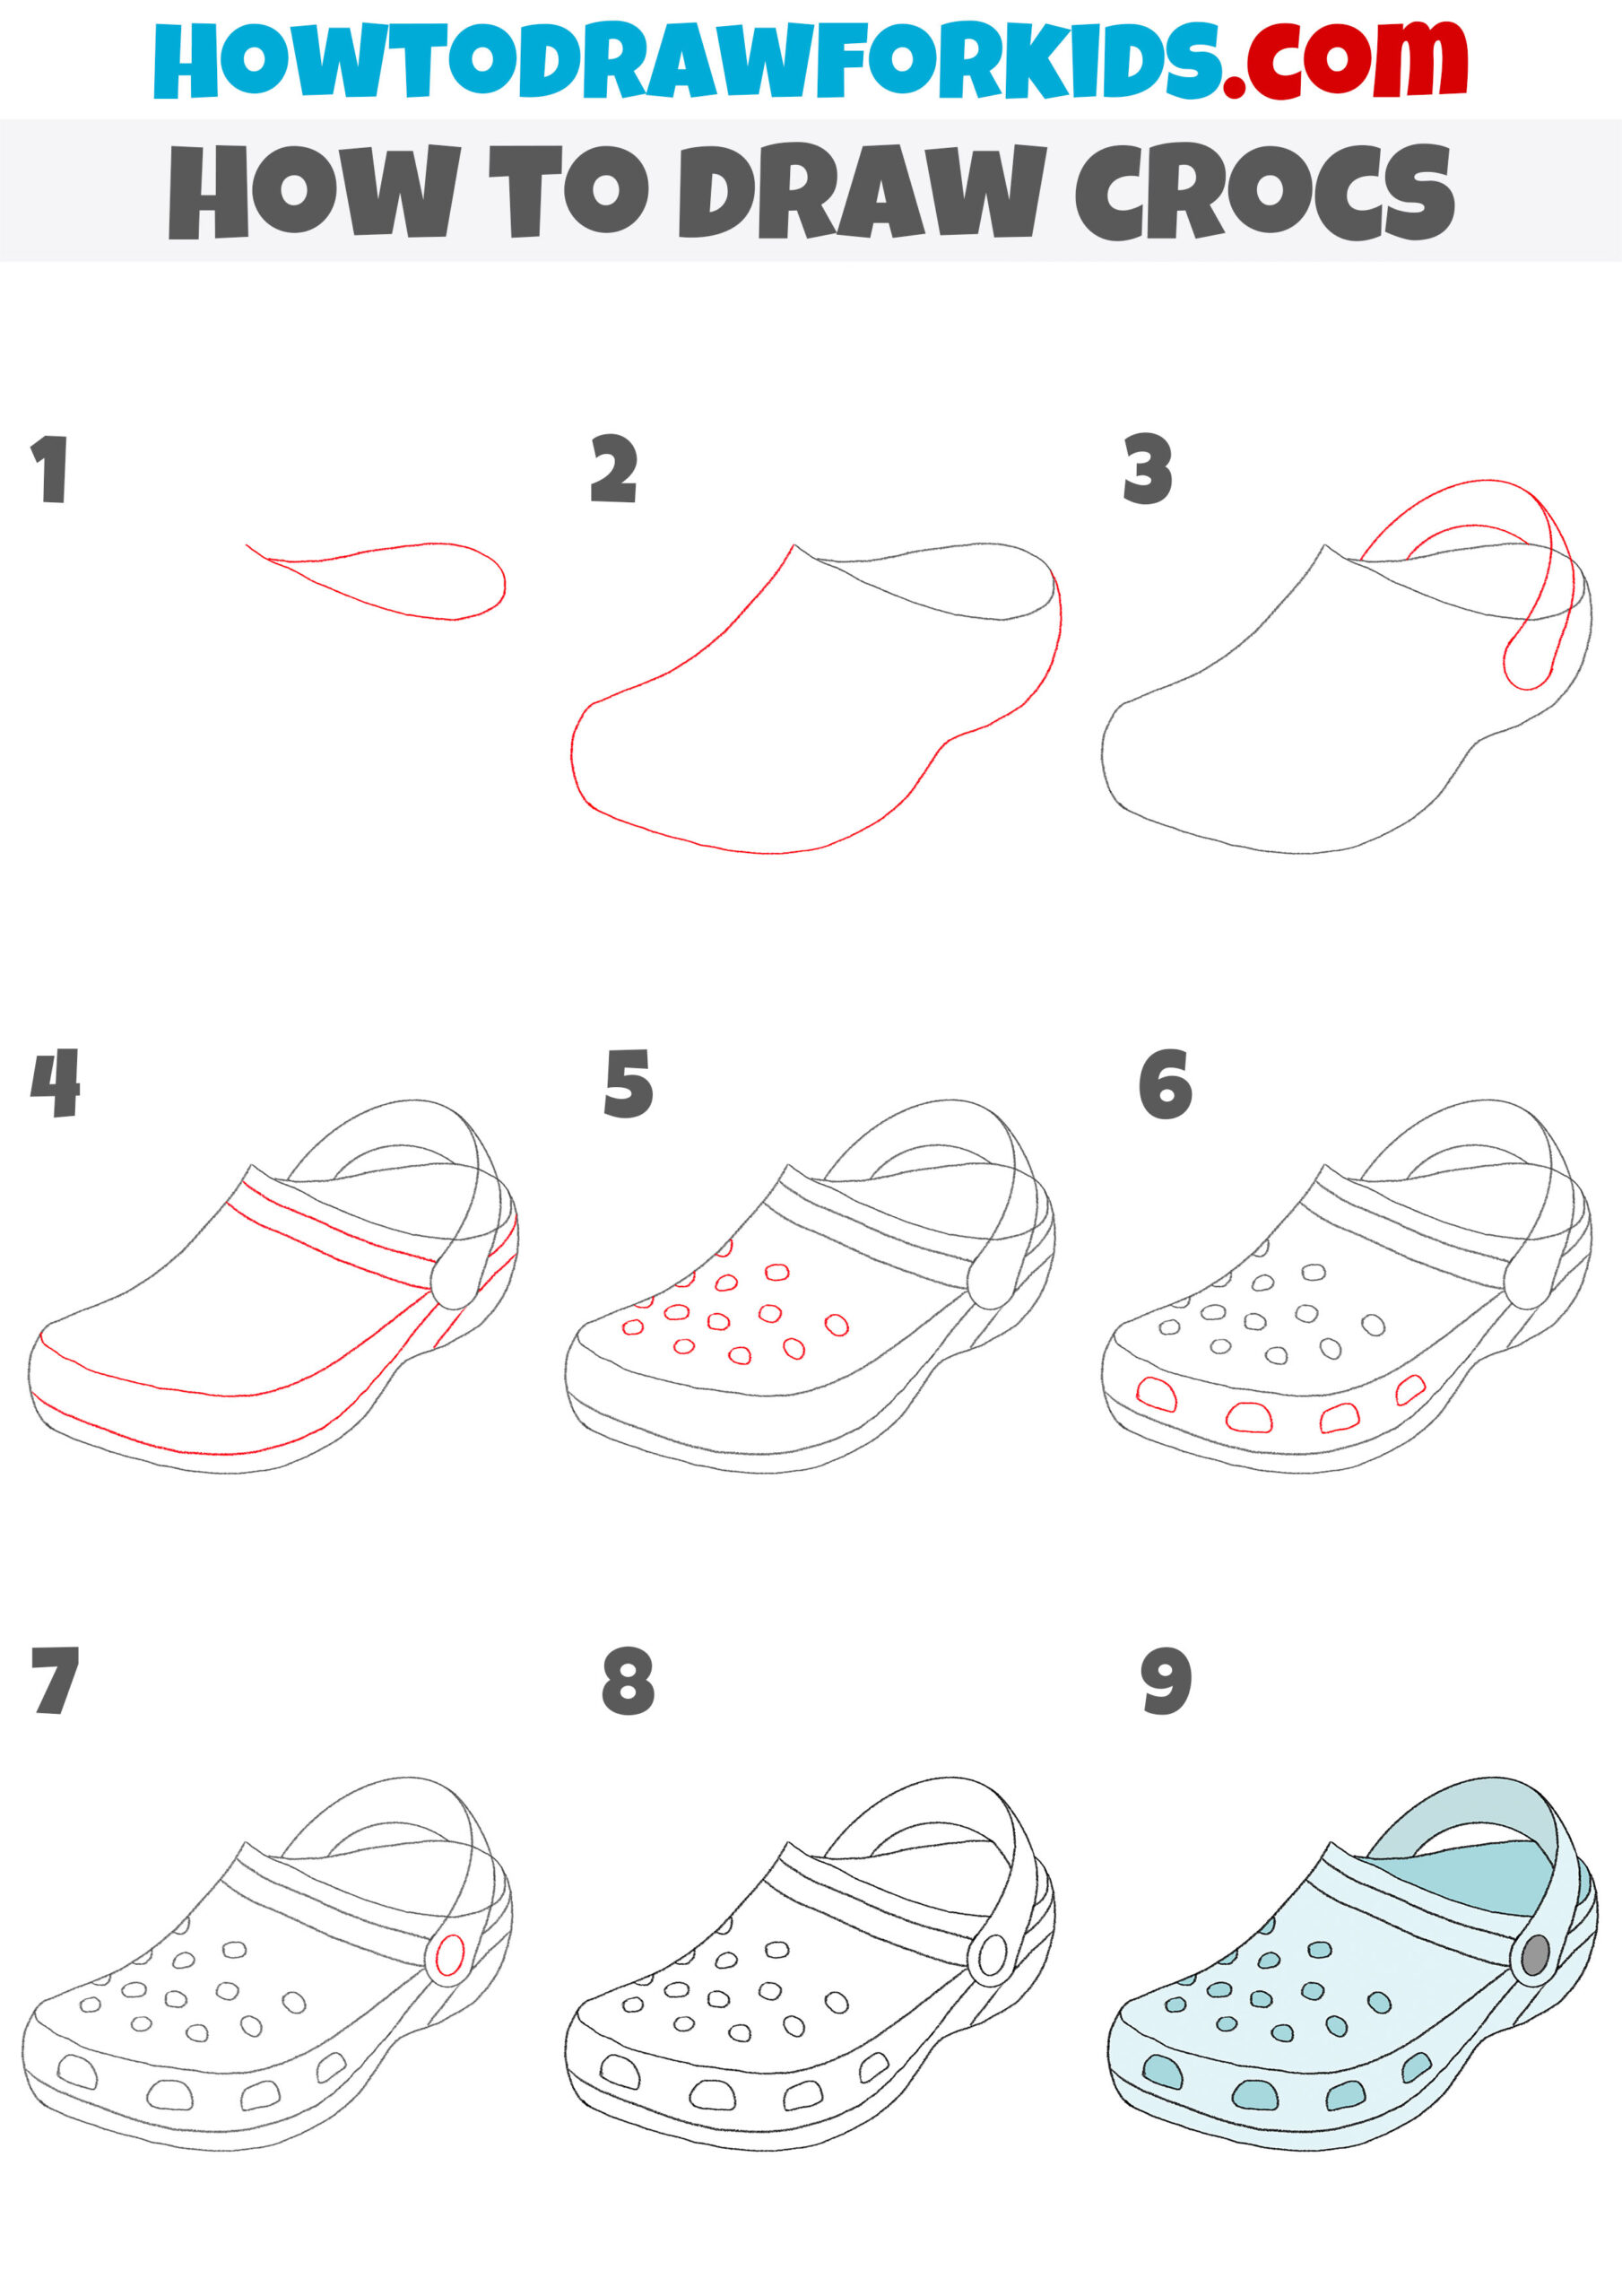 how to draw crocs step by step